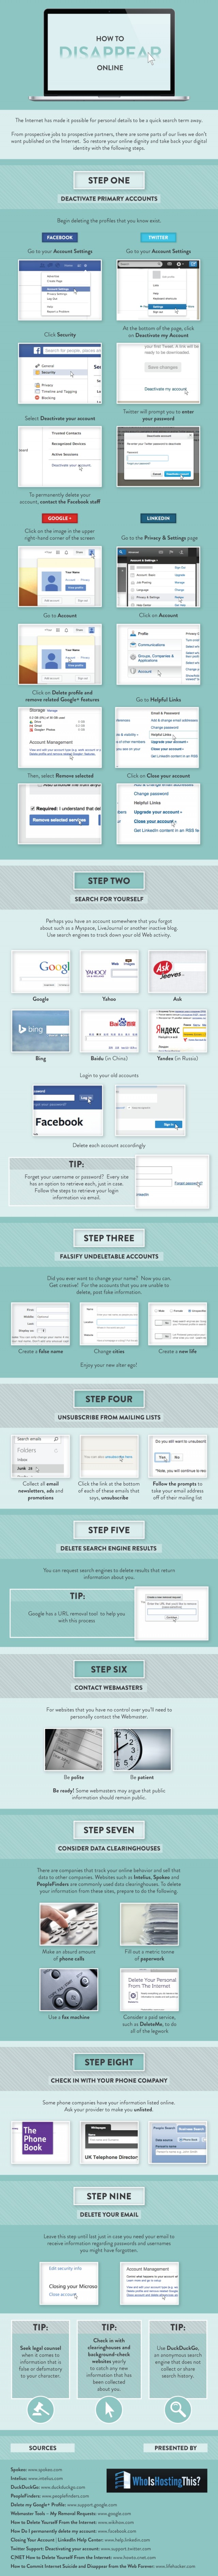 Infographie 139 - how-to-disappear-online-640x7555